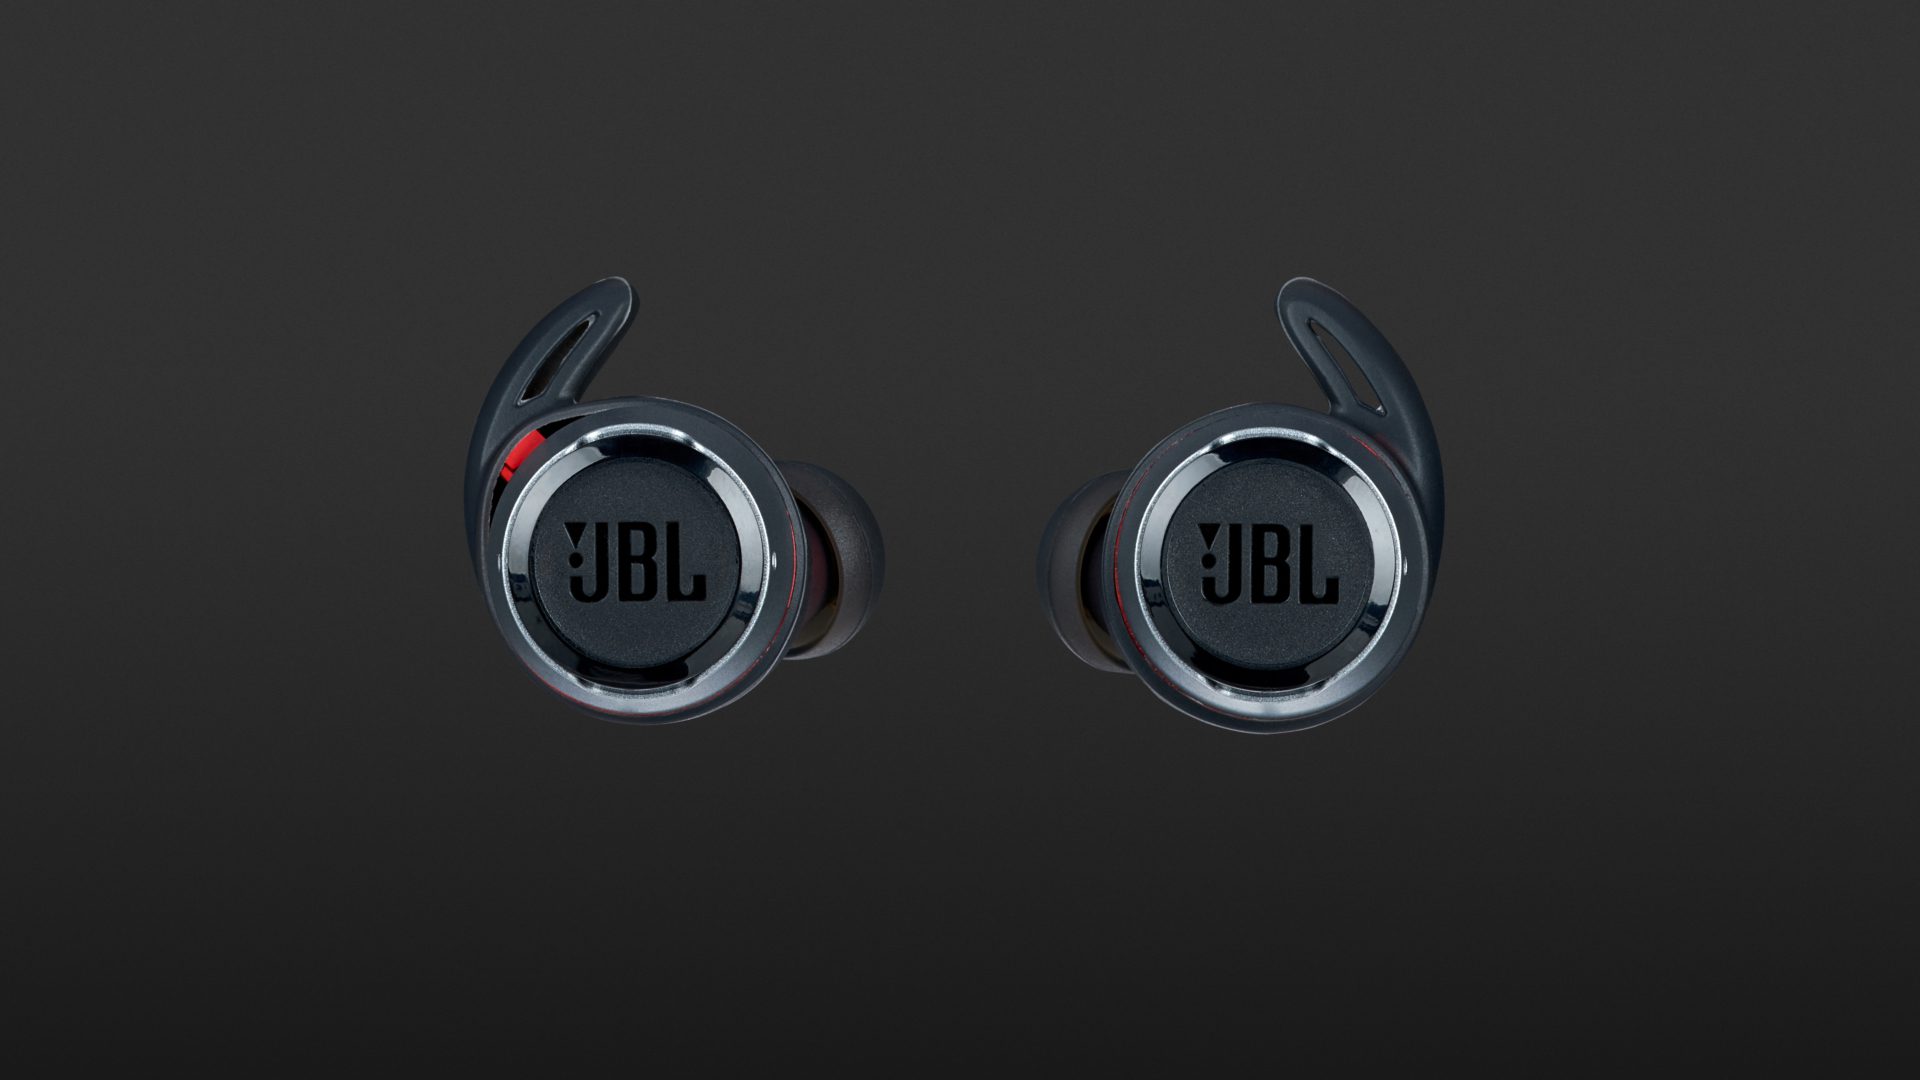 JBL Reflect Flow Pro Wireless Noise Cancelling Earbuds - White